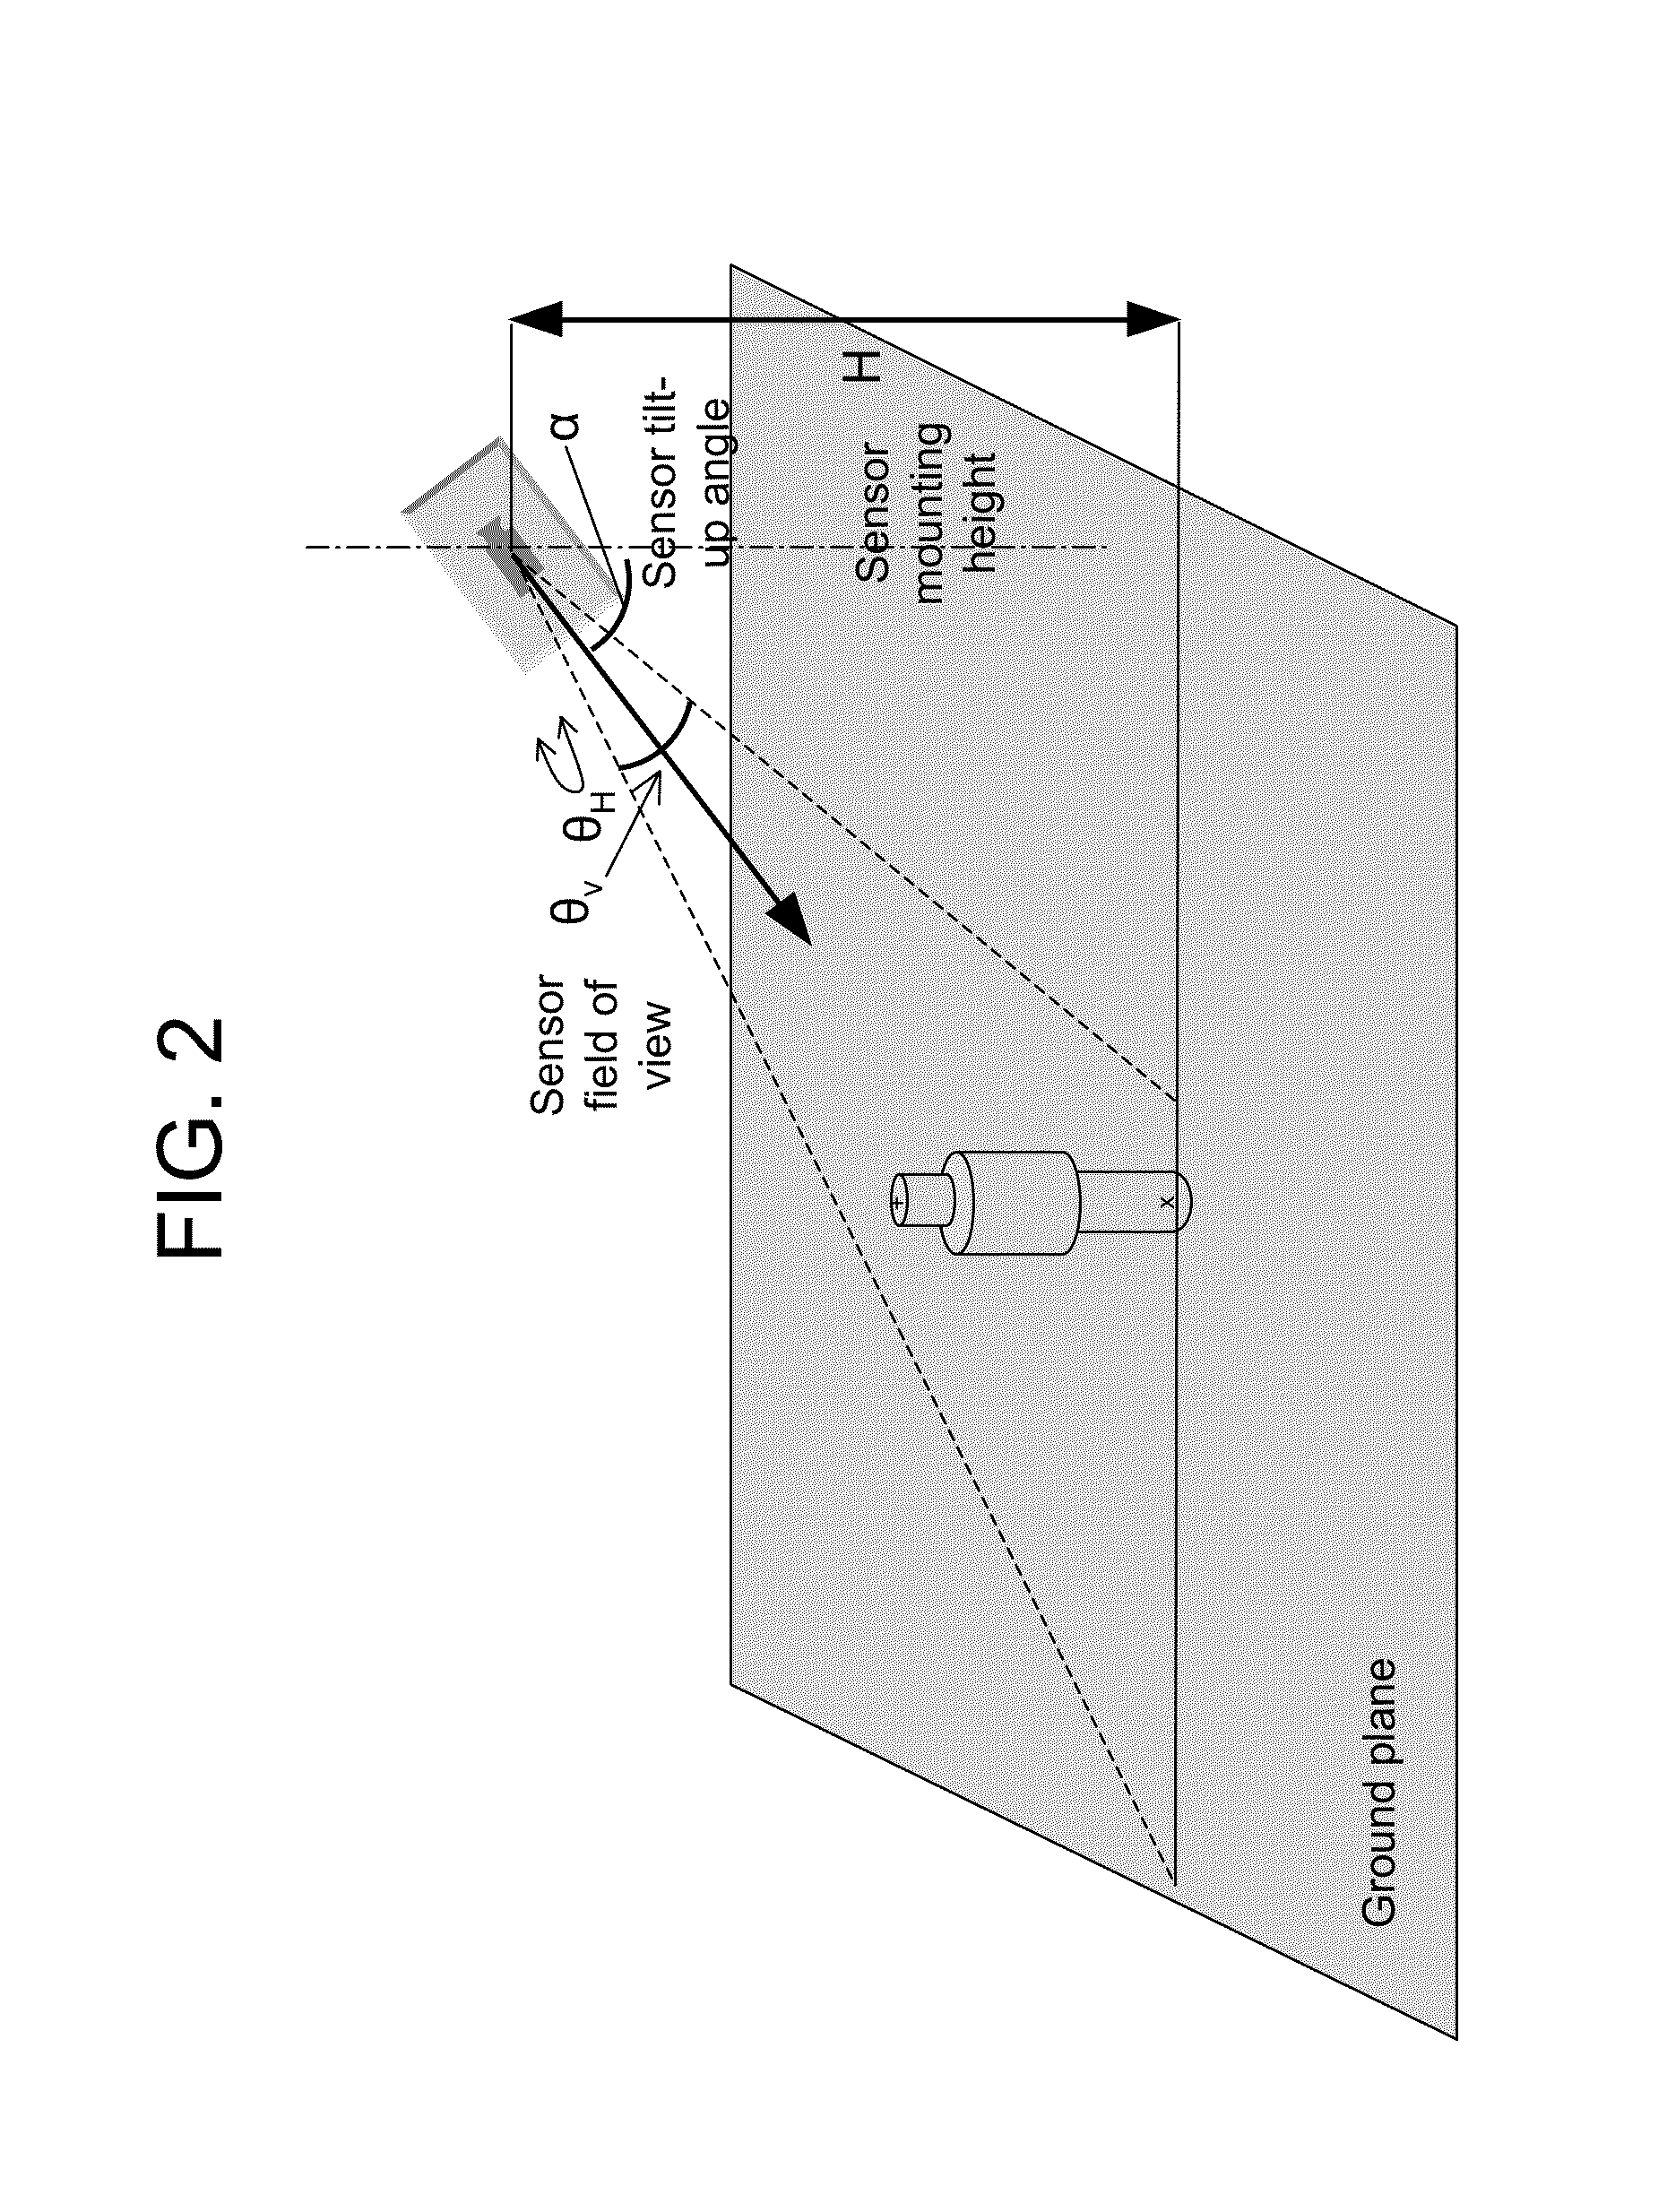 System and method for home health care monitoring